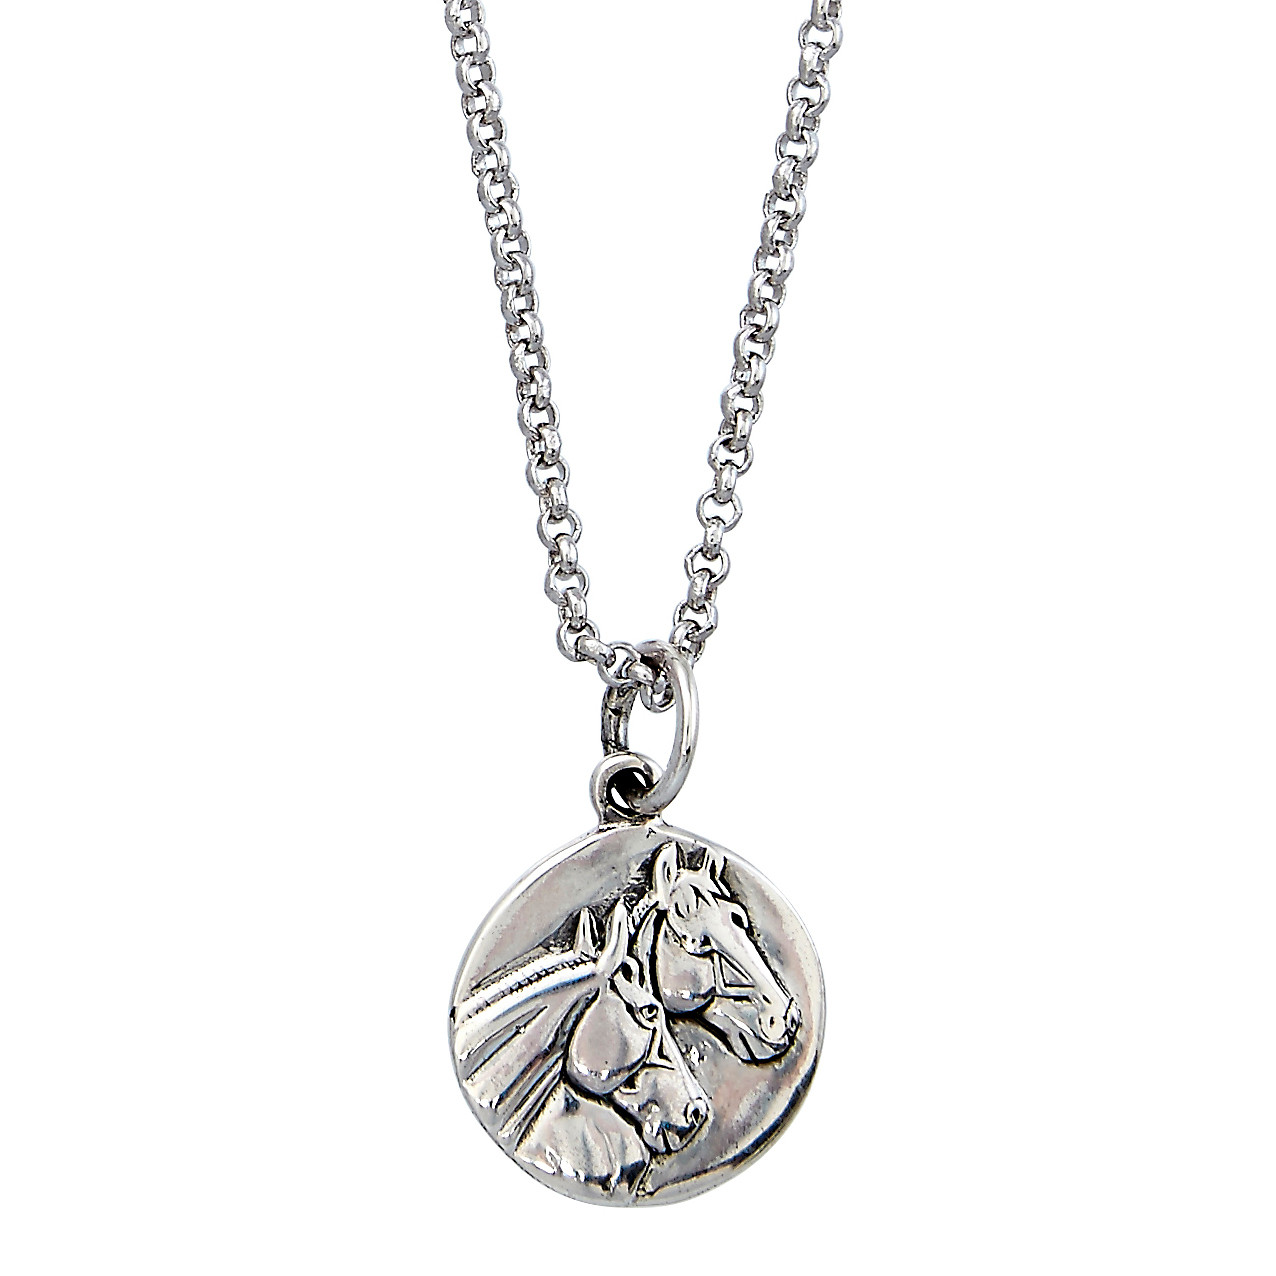 Sterling Silver Horse Necklace
 New Necklace Sterling Silver Horse Head Pendant JN9332